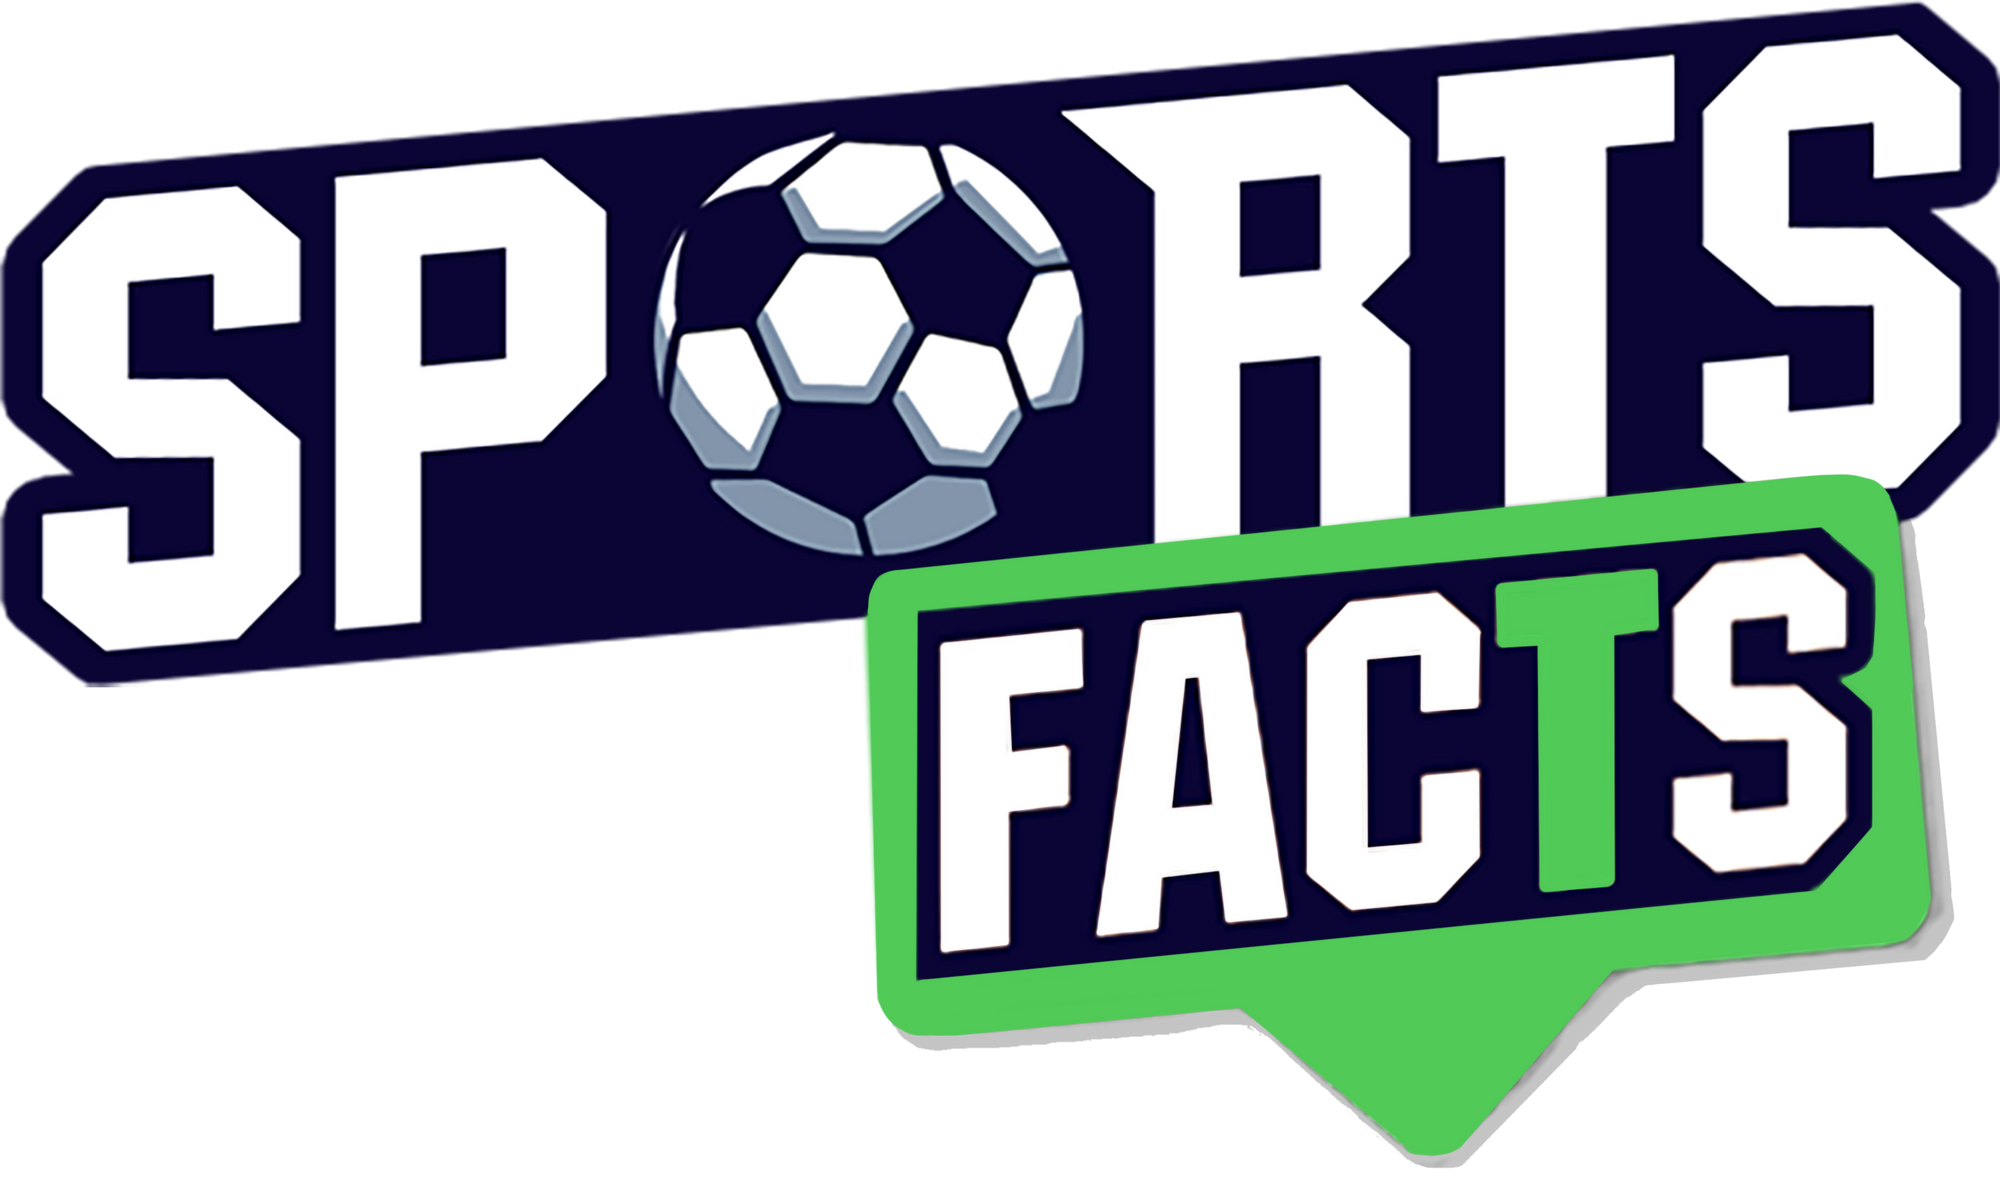 SportsFacts